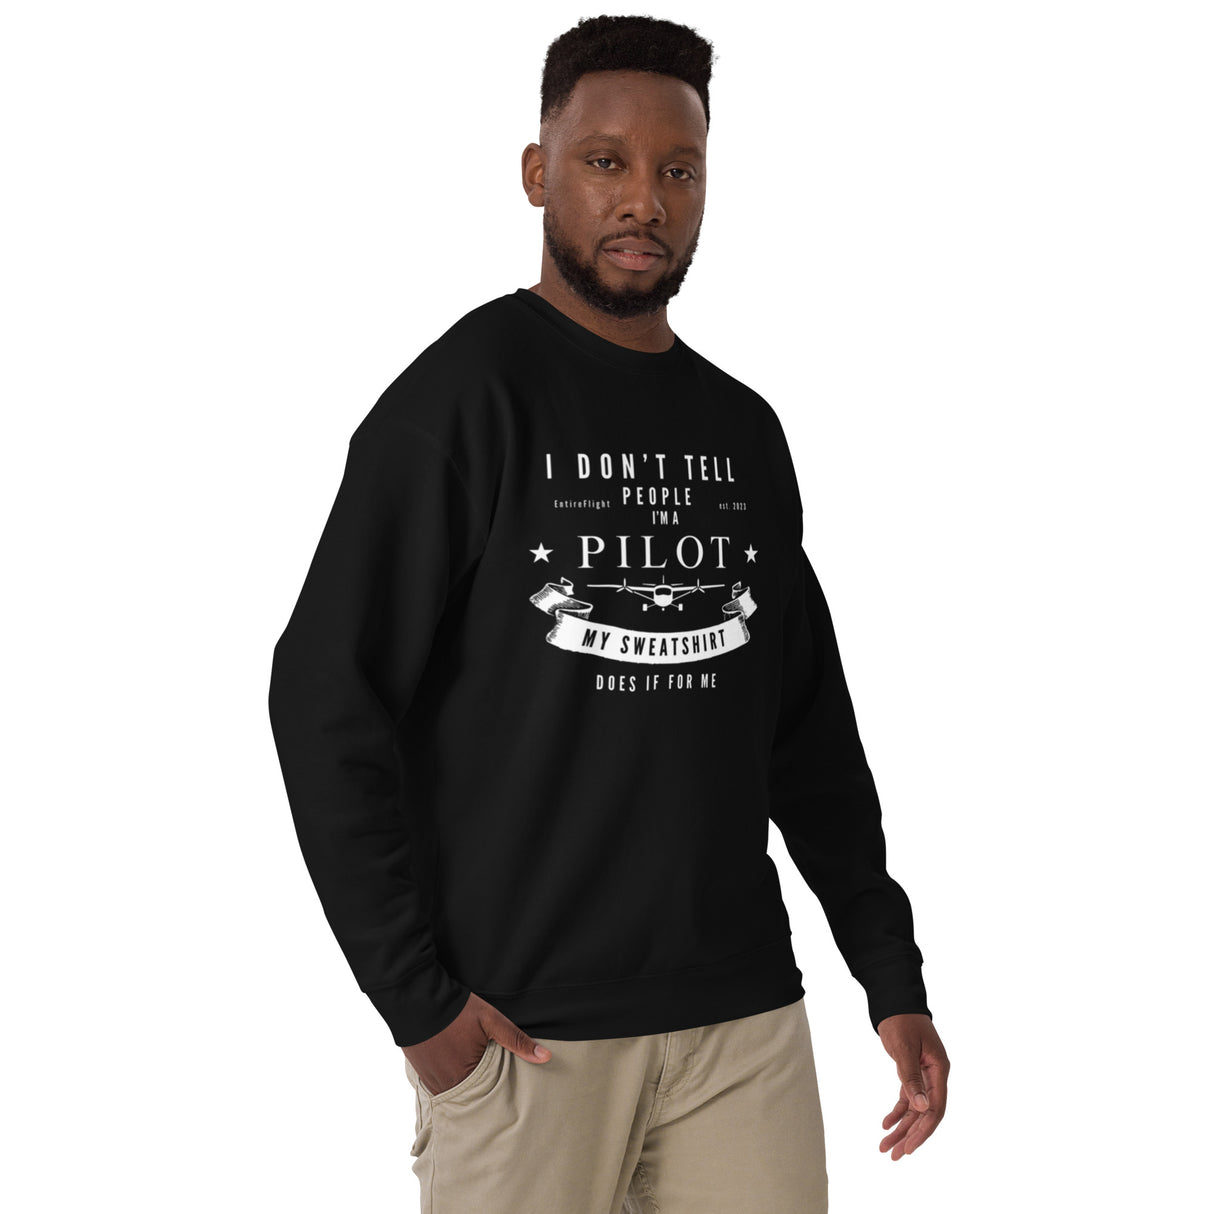 EntireFlight Crew Sweatshirt "Say You're a Pilot Without Saying You're a Pilot" - Gifts for Pilots